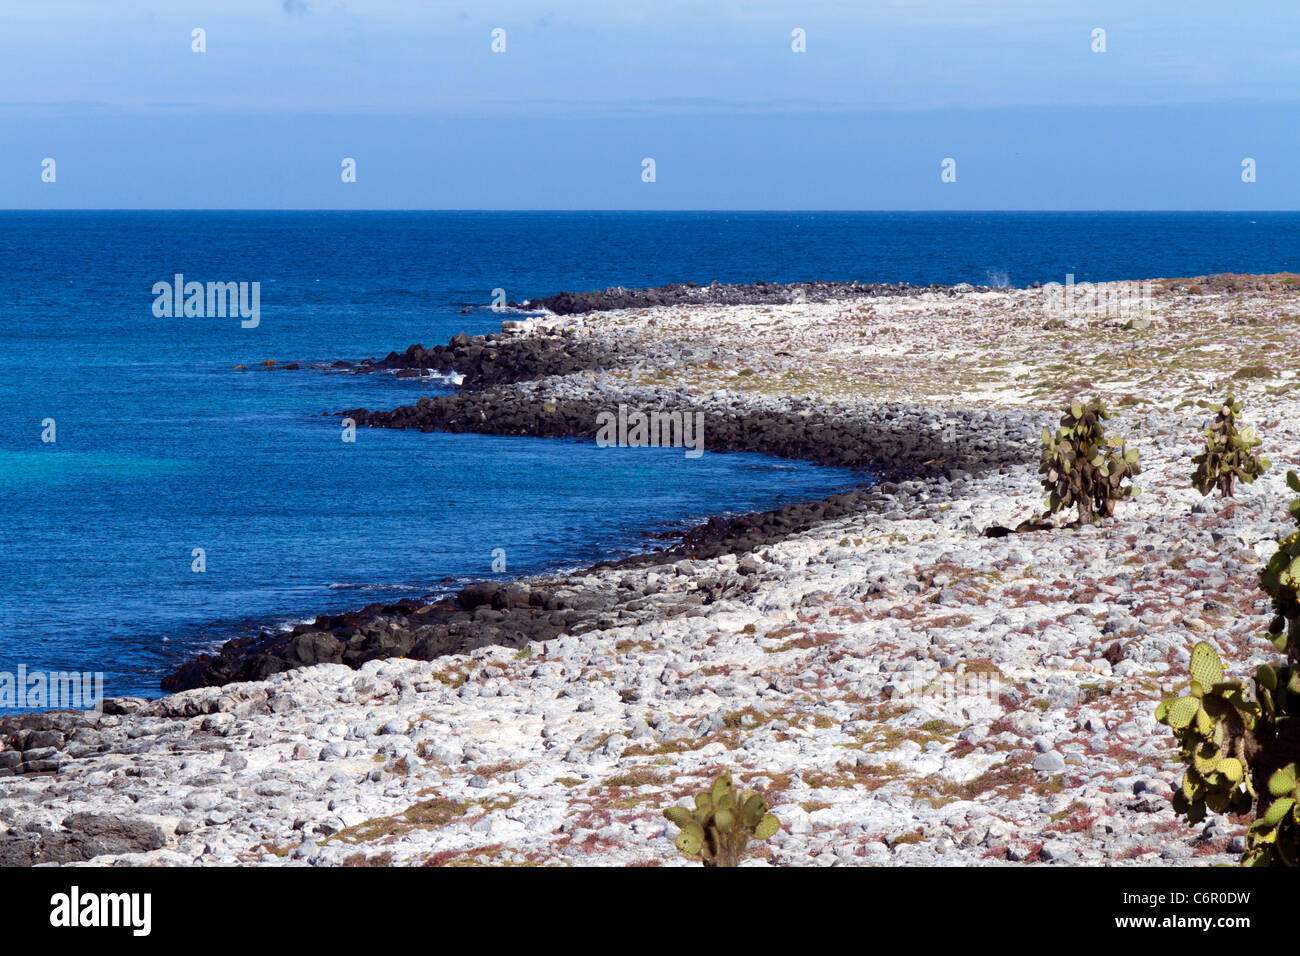 The rocky foreshore of South Plaza, Galapagos Islands Stock Photo